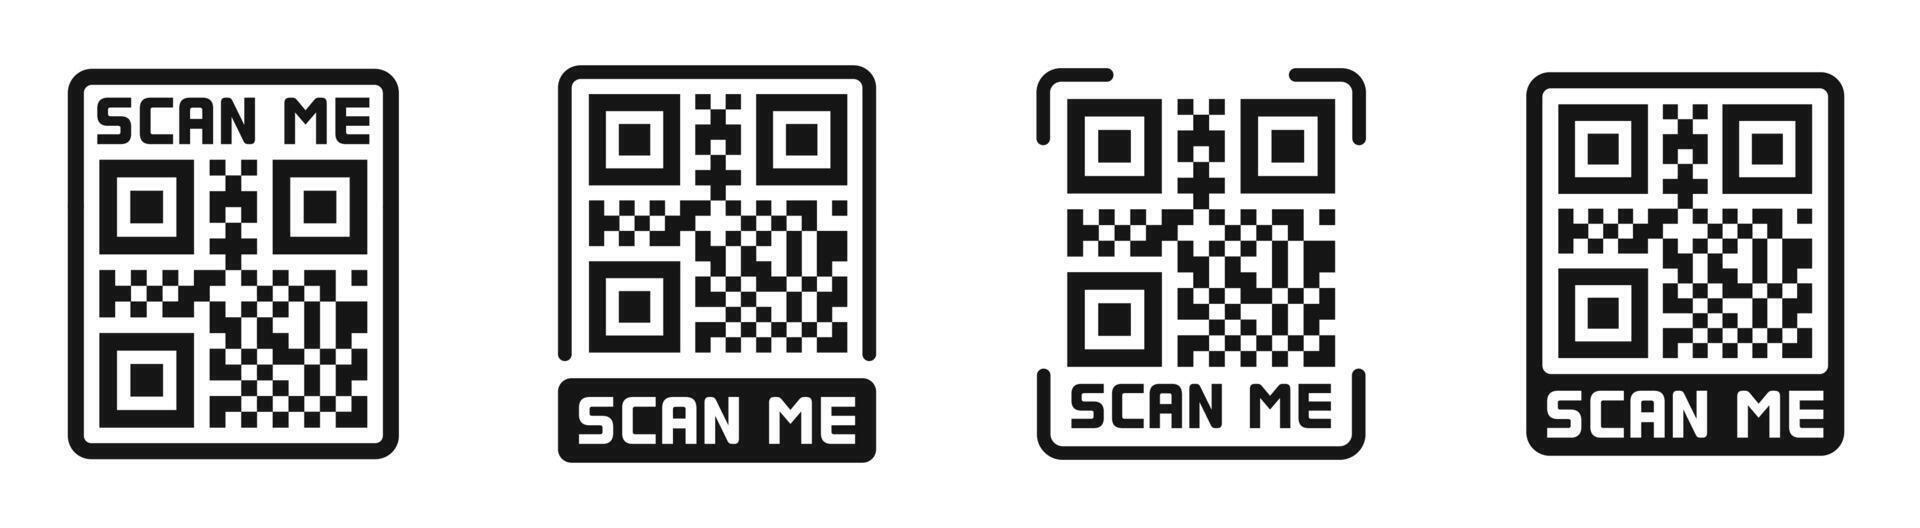 QR code scanning icon set. QR code scanner. Scan me icons. Silhouette style icons. vector